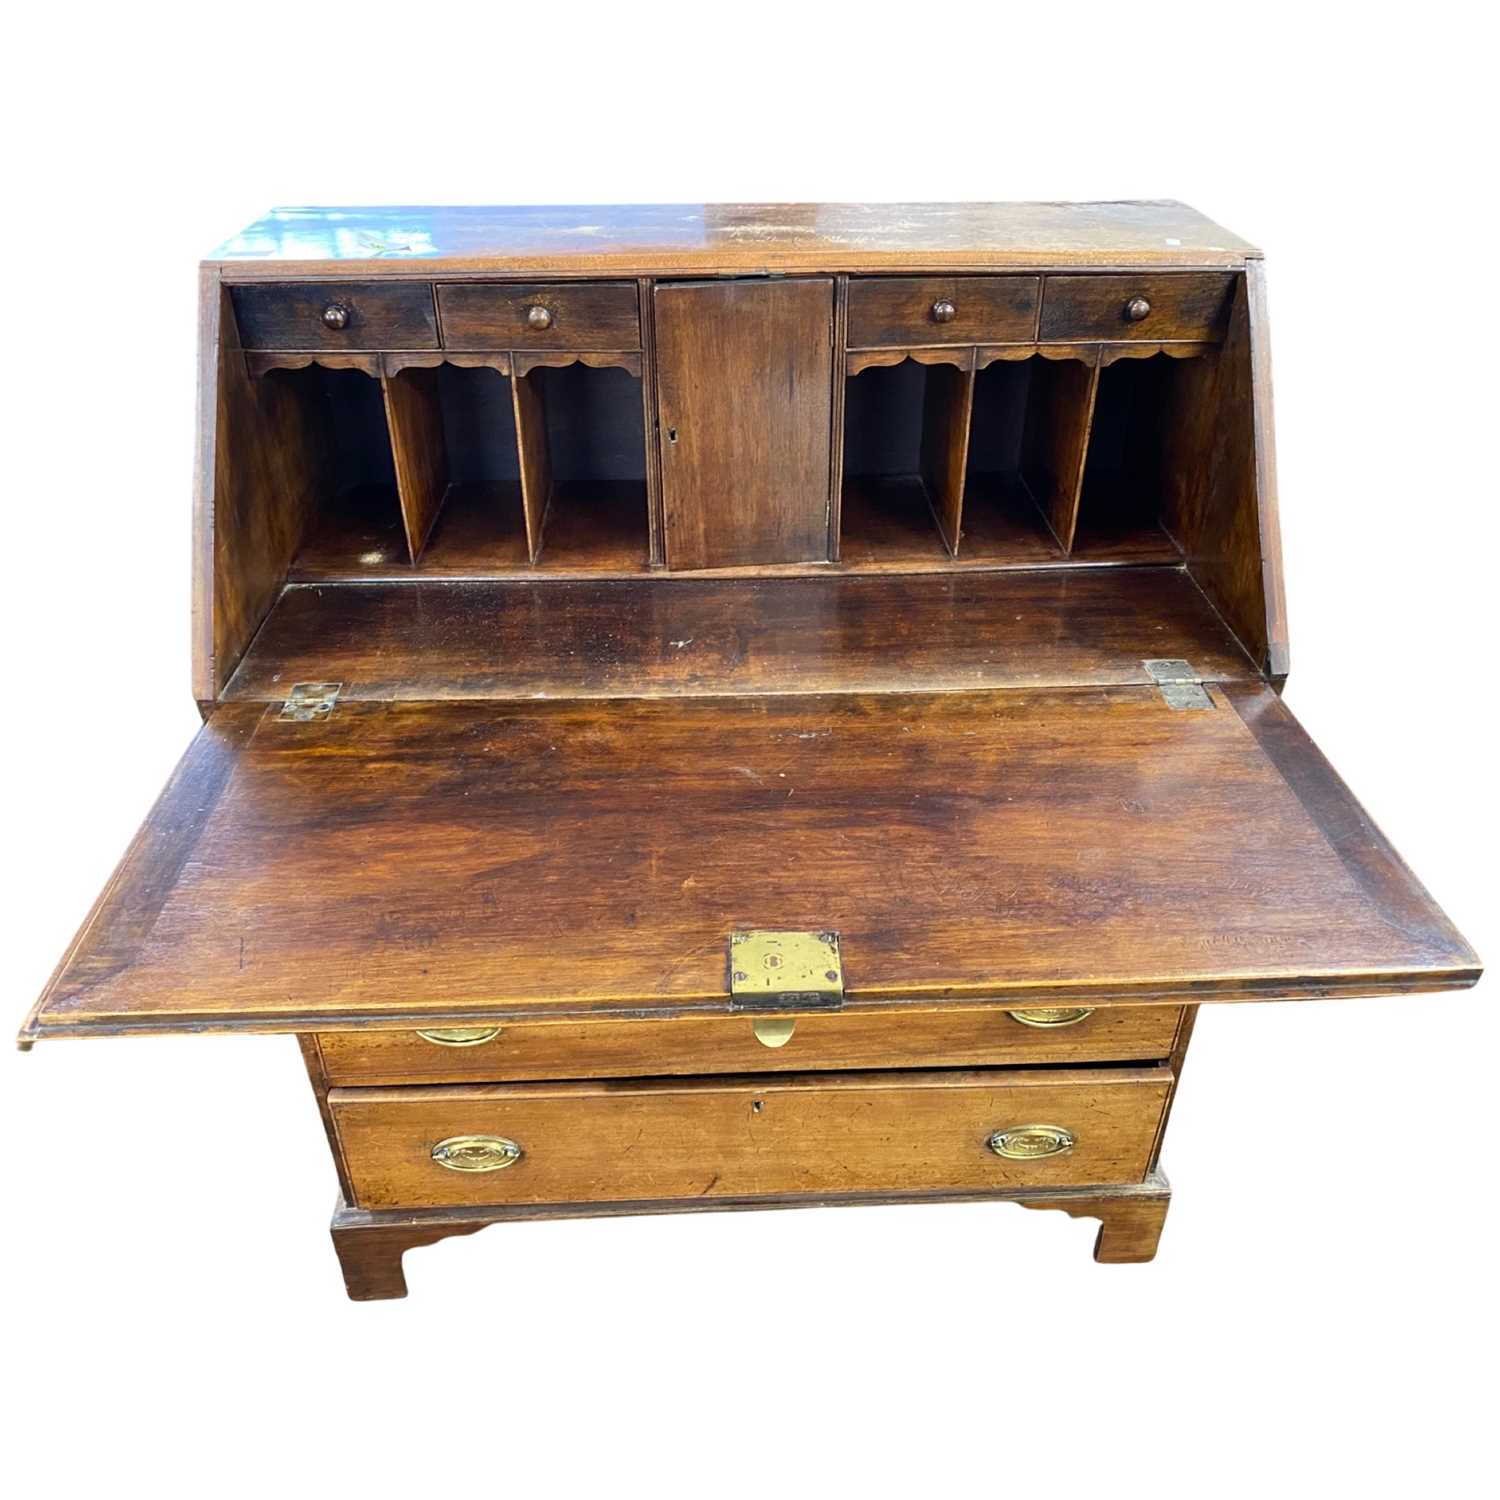 Early 19th Century red walnut bureau with full front opening to a fitted interior with small drawers - Image 2 of 3